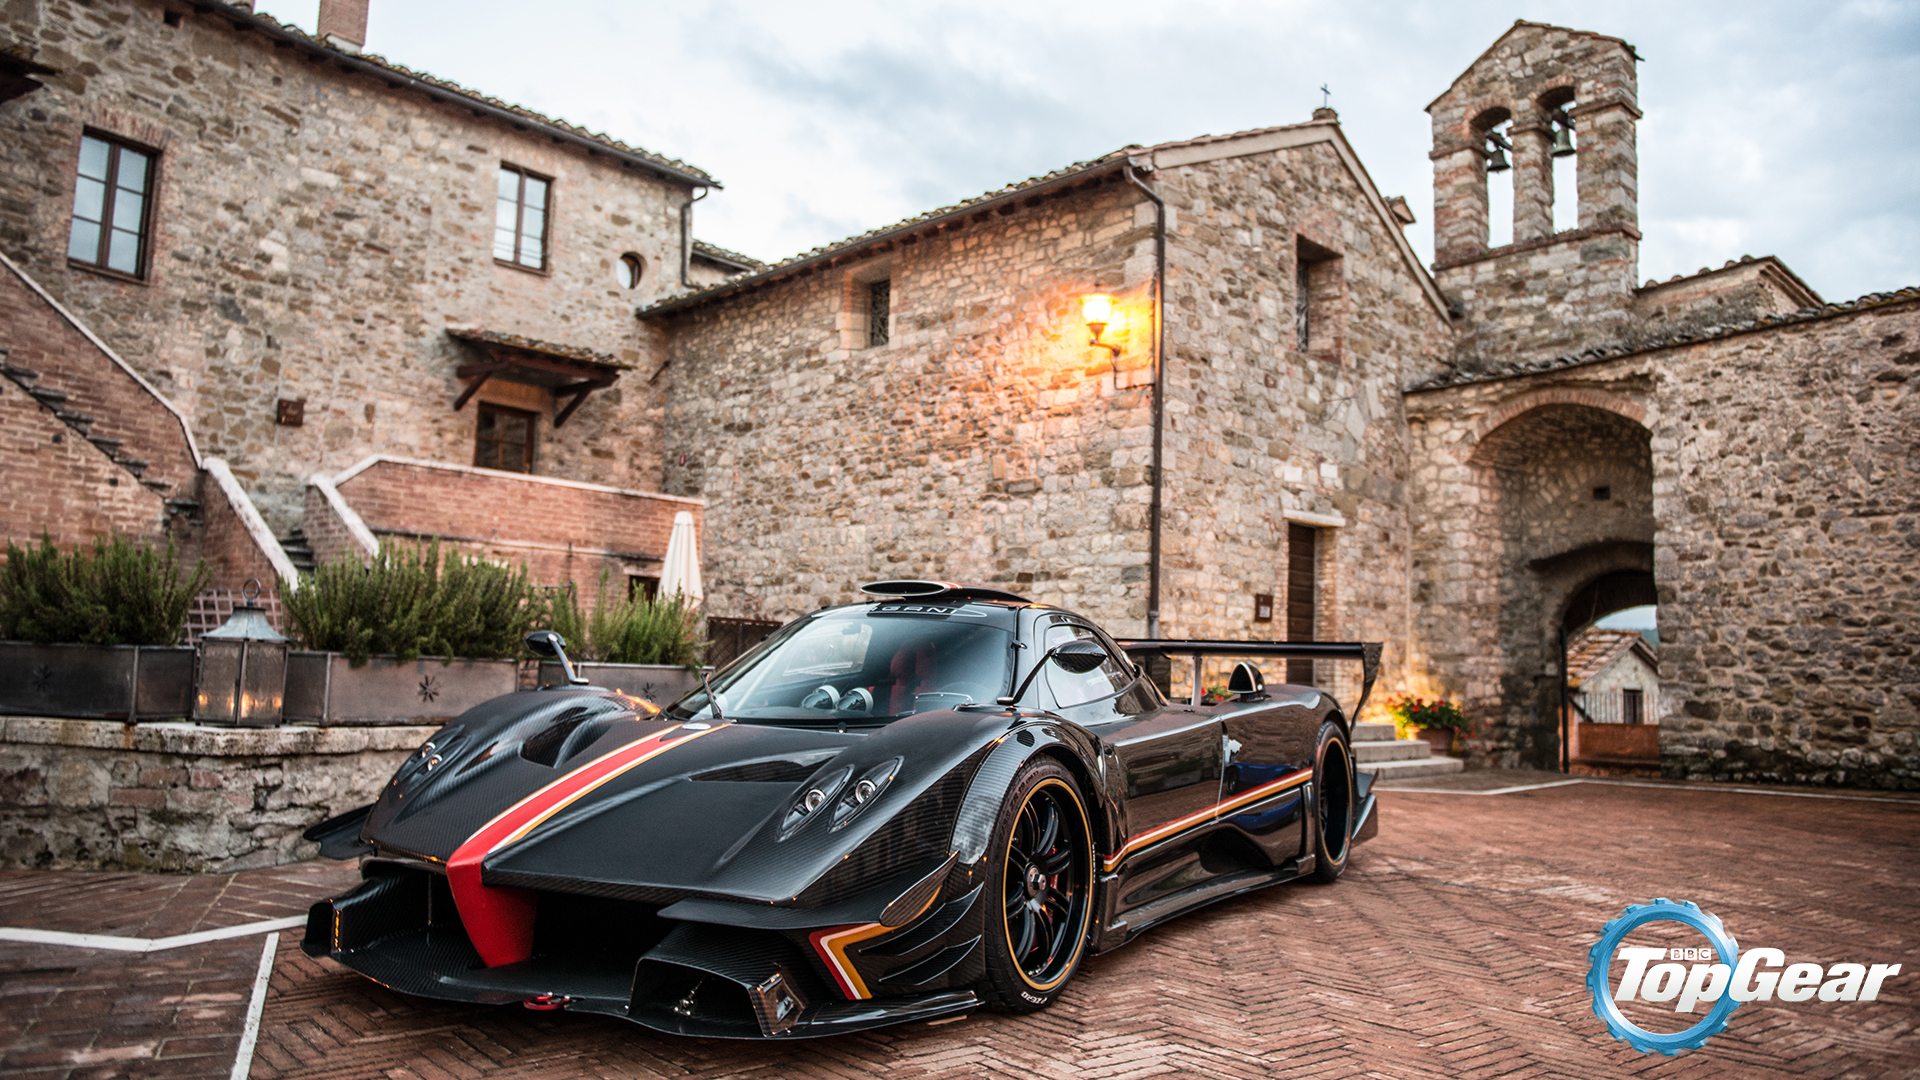 1920x1080 Wallpapers: thirteen Paganis across Italy